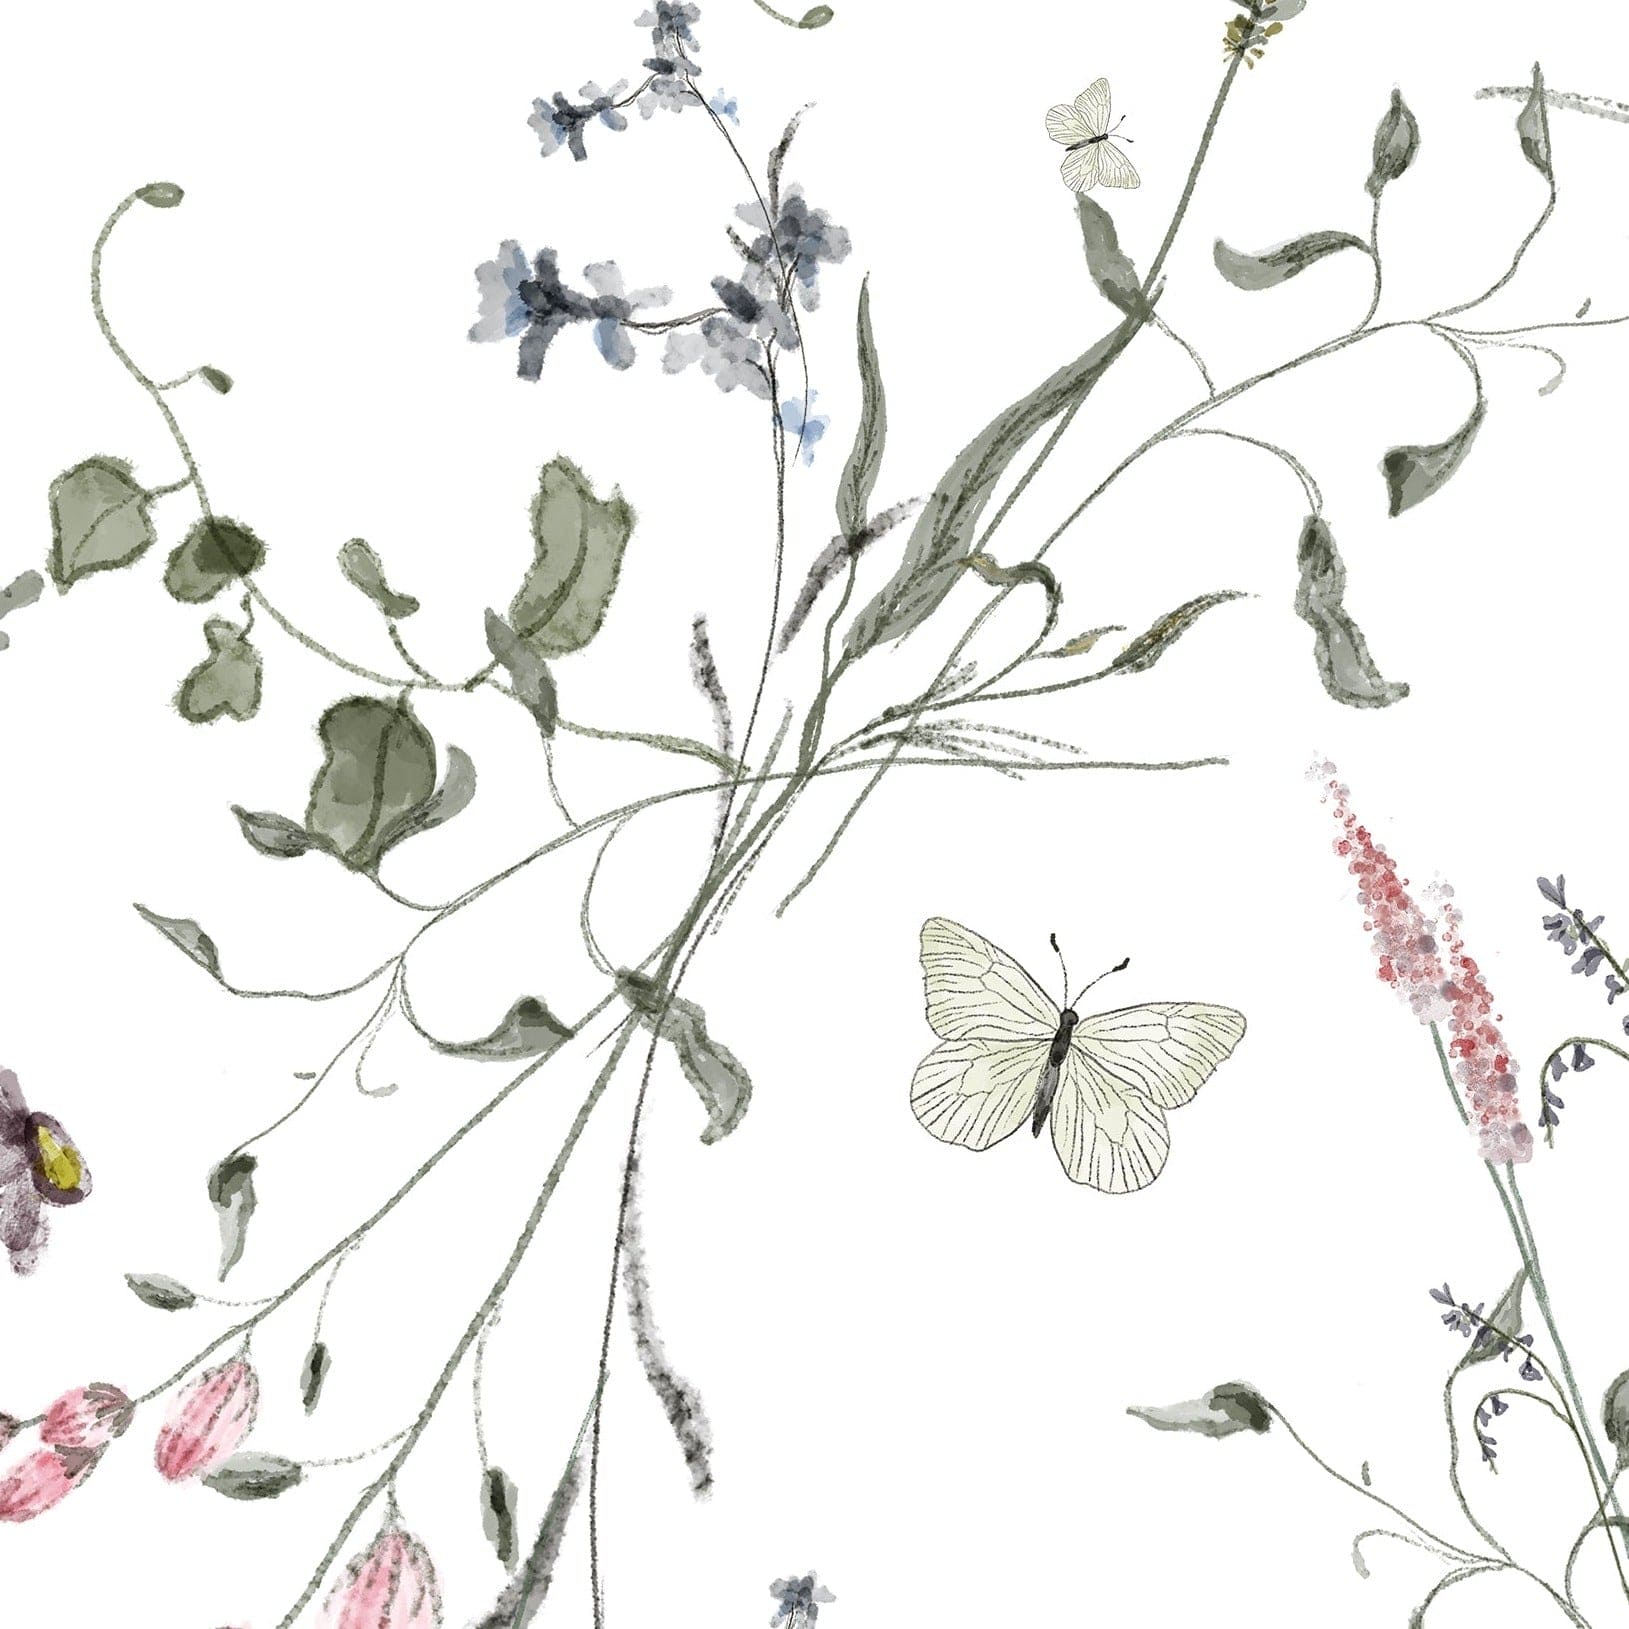 A close-up view of the Lovely Botanicals Wallpaper showing its intricate pattern of light floral branches, tiny leaves, and fluttering butterflies, rendered in watercolor for a delicate and airy feel.